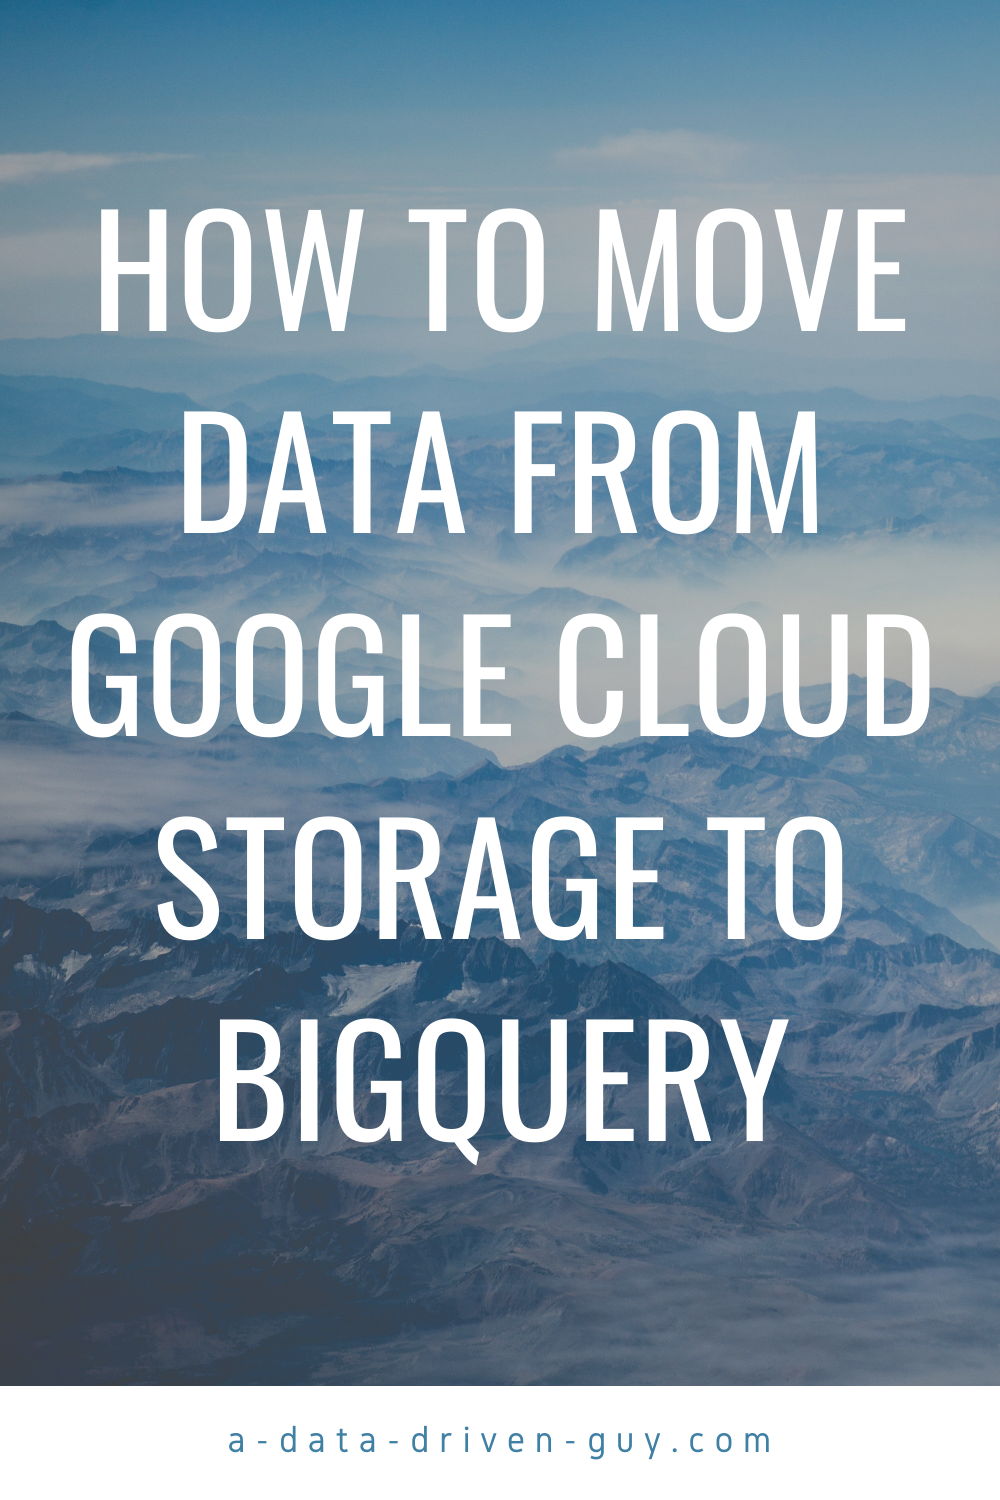 How to move daily data from Google Cloud Storage to BigQuery using Matillion ETL and Cloud Run